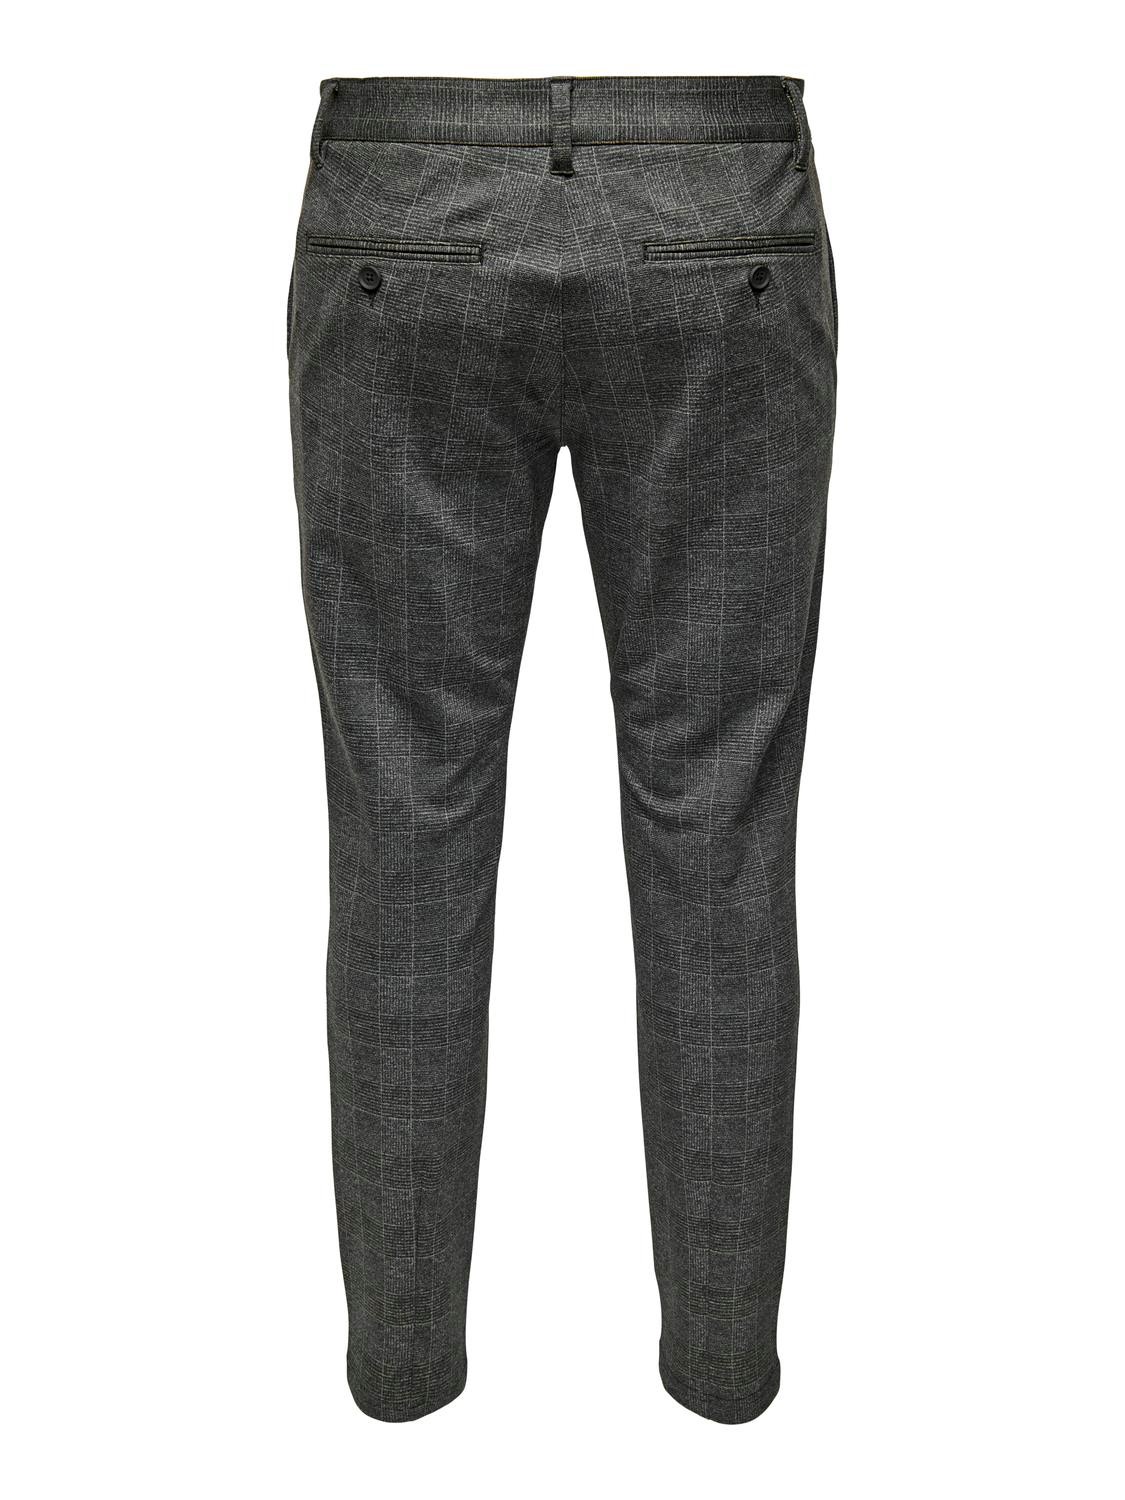 ONLY & SONS Checkered chinos -Black - 22019887